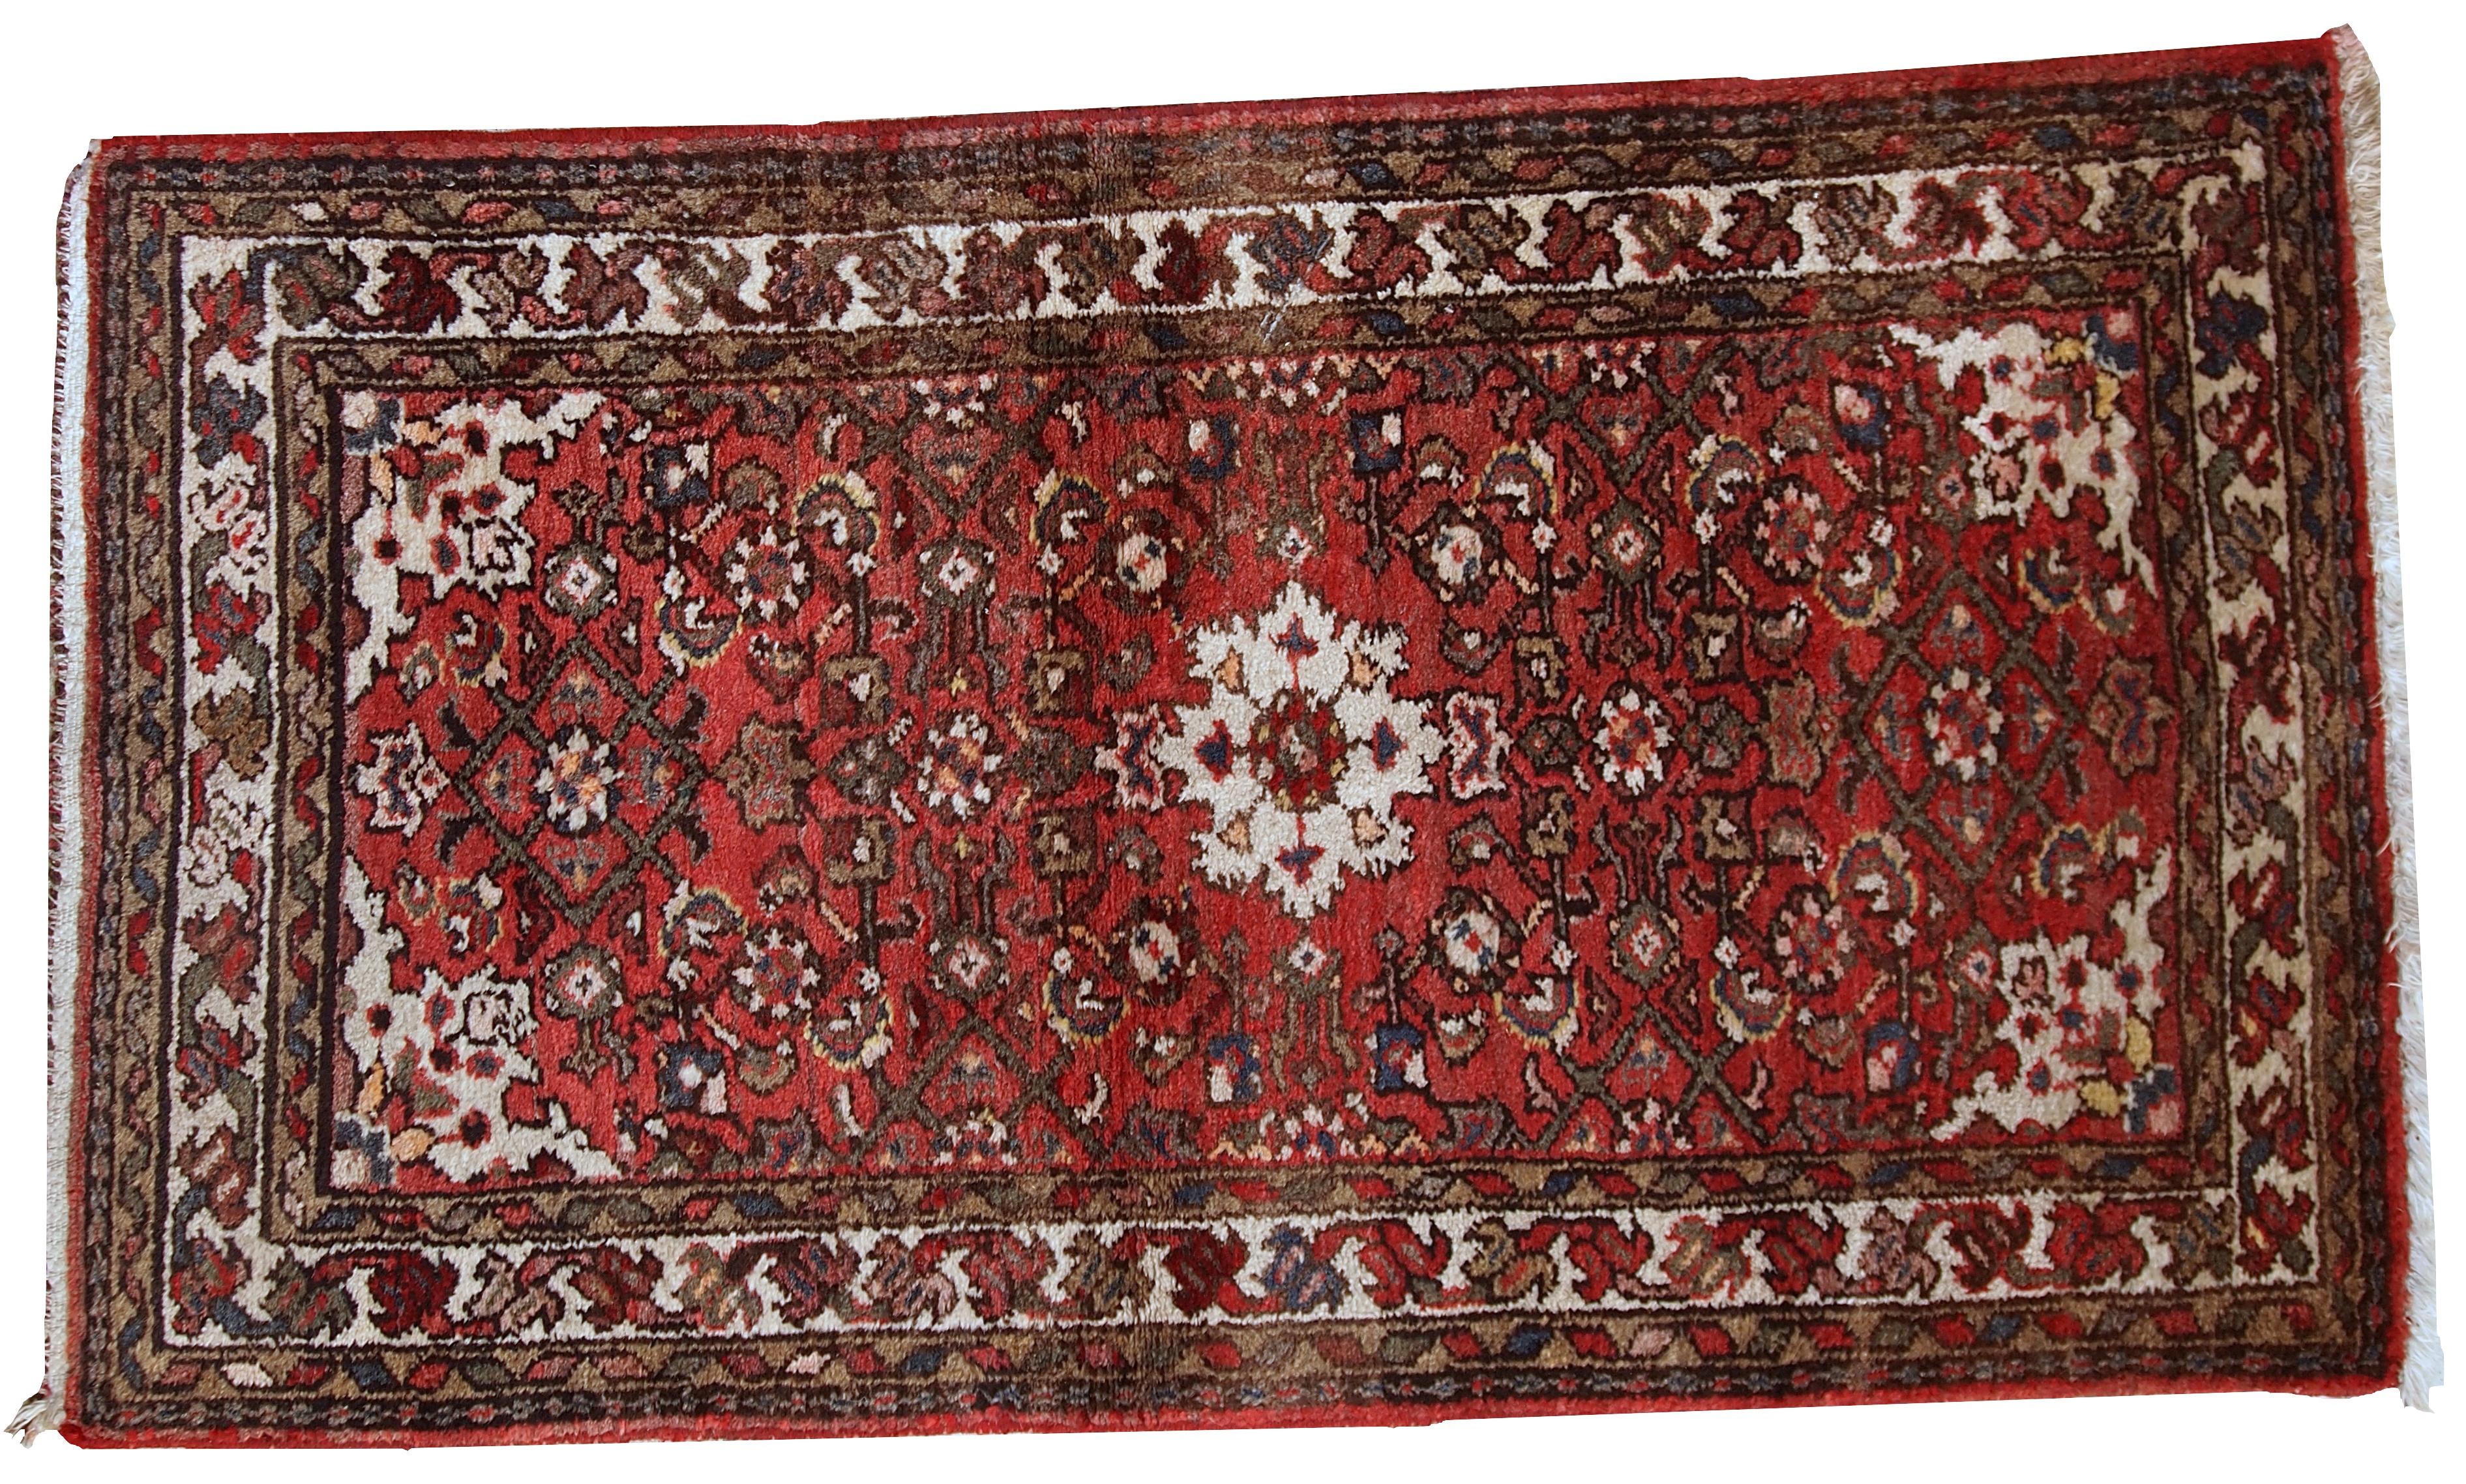 Vintage Hamadan style rug in good original condition. The rug is from the middle of 20th century made in red wool. Measures: 2.4' x 4.3' (75 cm x 132 cm).